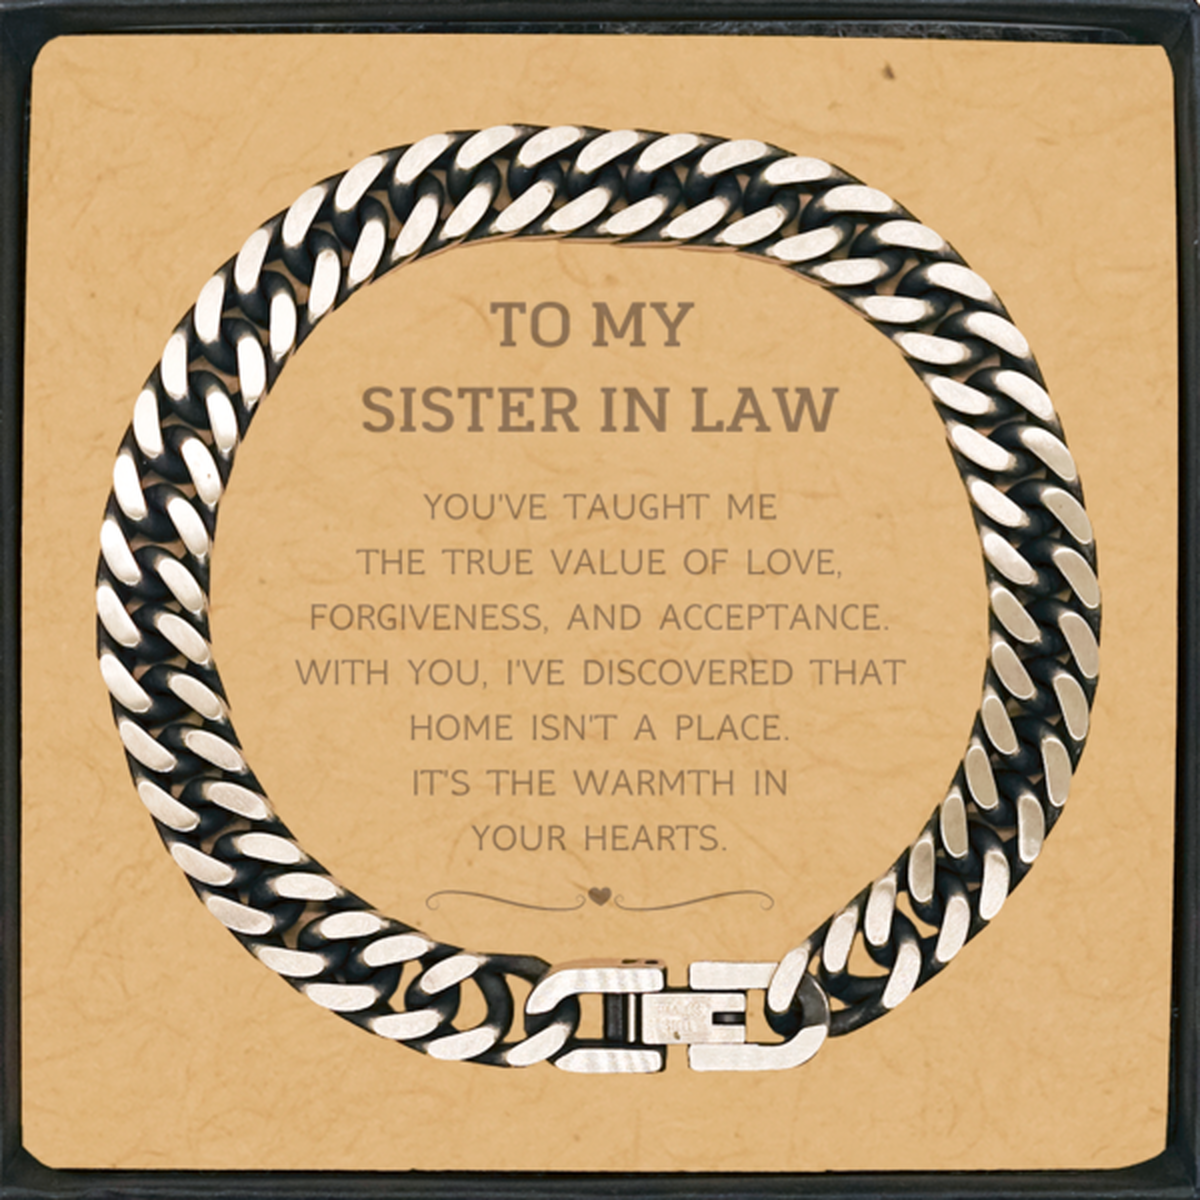 To My Sister In Law Gifts, You've taught me the true value of love, Thank You Gifts For Sister In Law, Birthday Cuban Link Chain Bracelet For Sister In Law